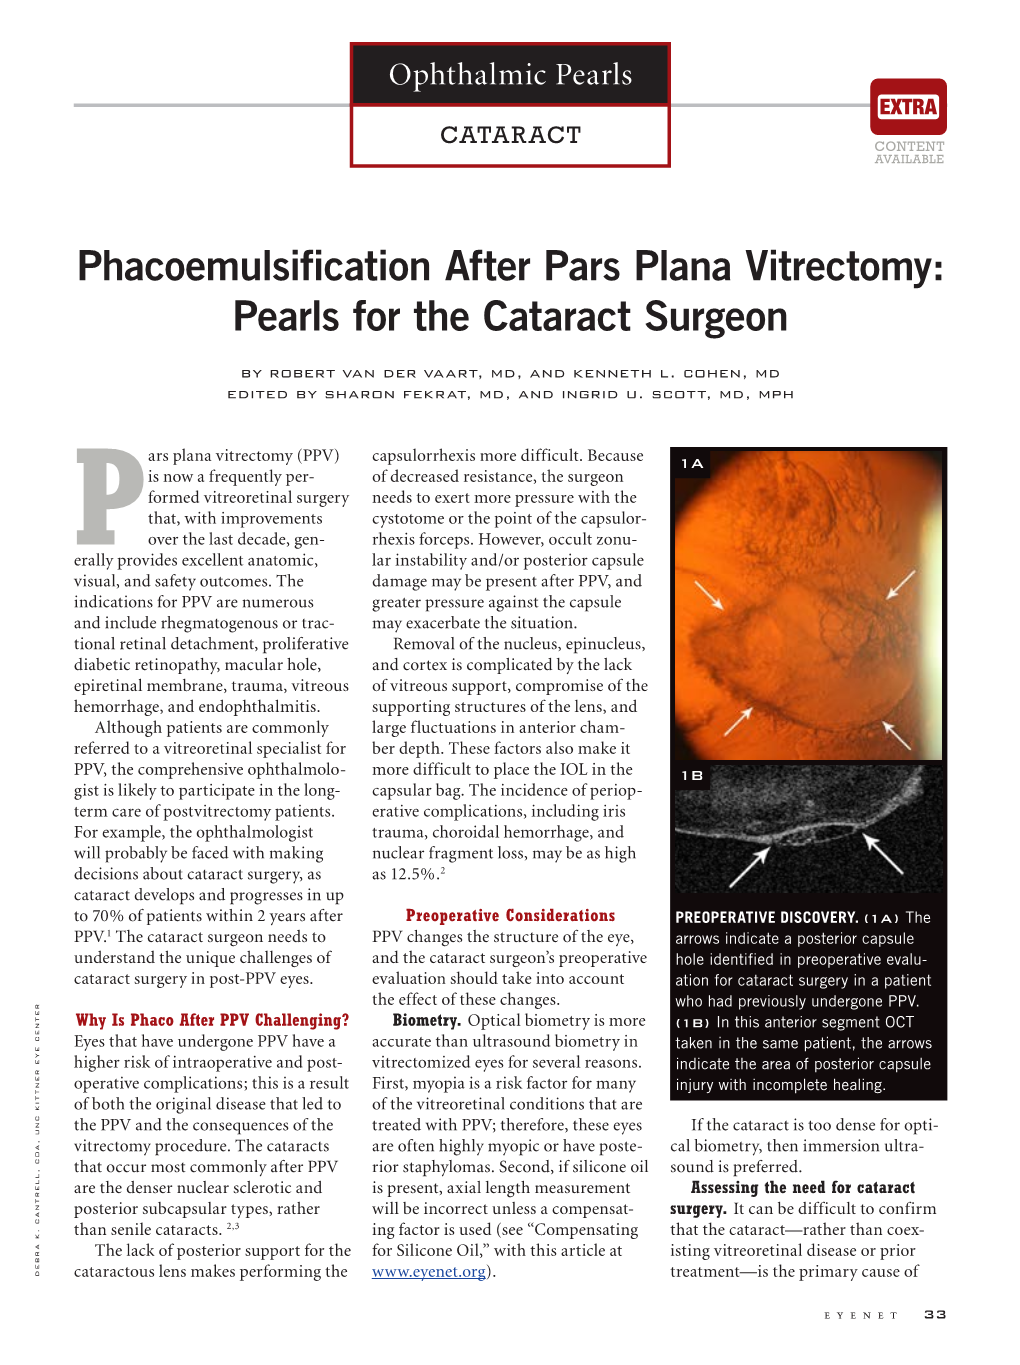 Phacoemulsification After Pars Plana Vitrectomy: Pearls for the Cataract Surgeon